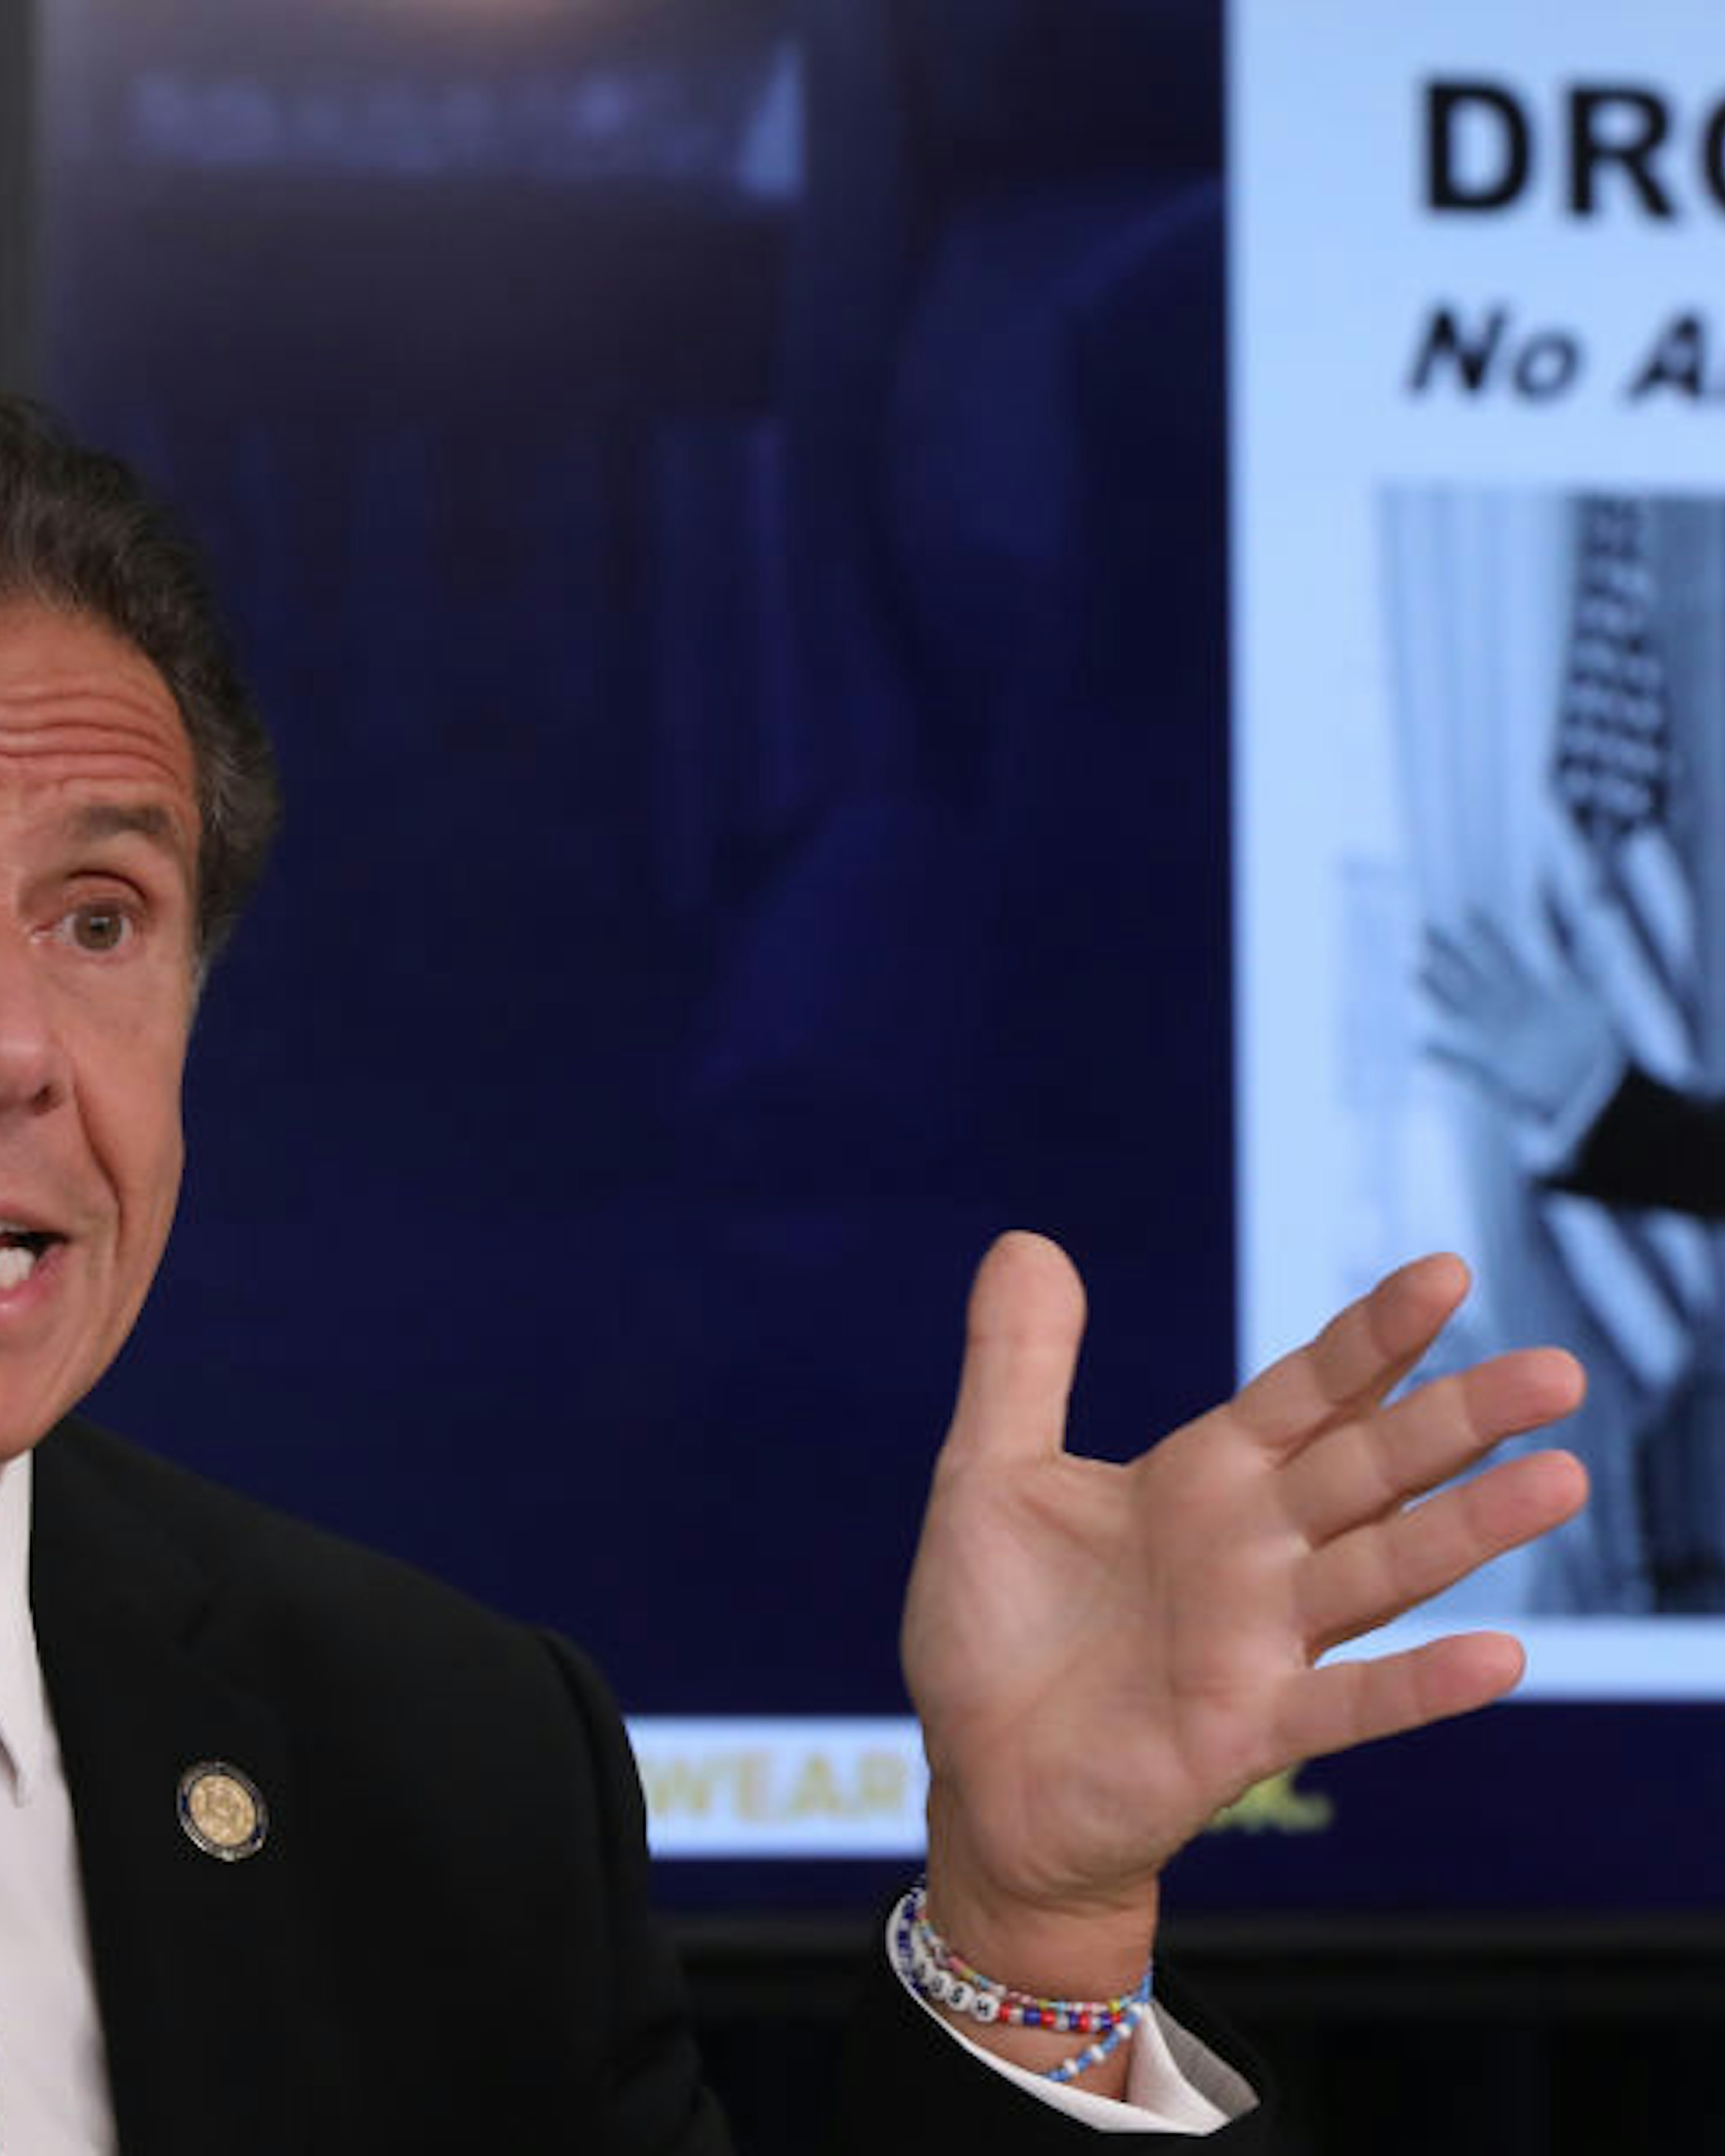 A mock up of a newspaper headline and photo of U.S. President Donald Trump is displayed on a screen as New York state Gov. Andrew Cuomo criticizes Trump's handling of COVID-19 at a news conference on September 08, 2020 in New York City. Cuomo, though easing restrictions on casinos and malls throughout the state, has declined to do so for indoor dining in restaurants in New York City despite pressure from business owners, citing struggles by the city to enforce the state's previous orders. (Photo by Spencer Platt/Getty Images)